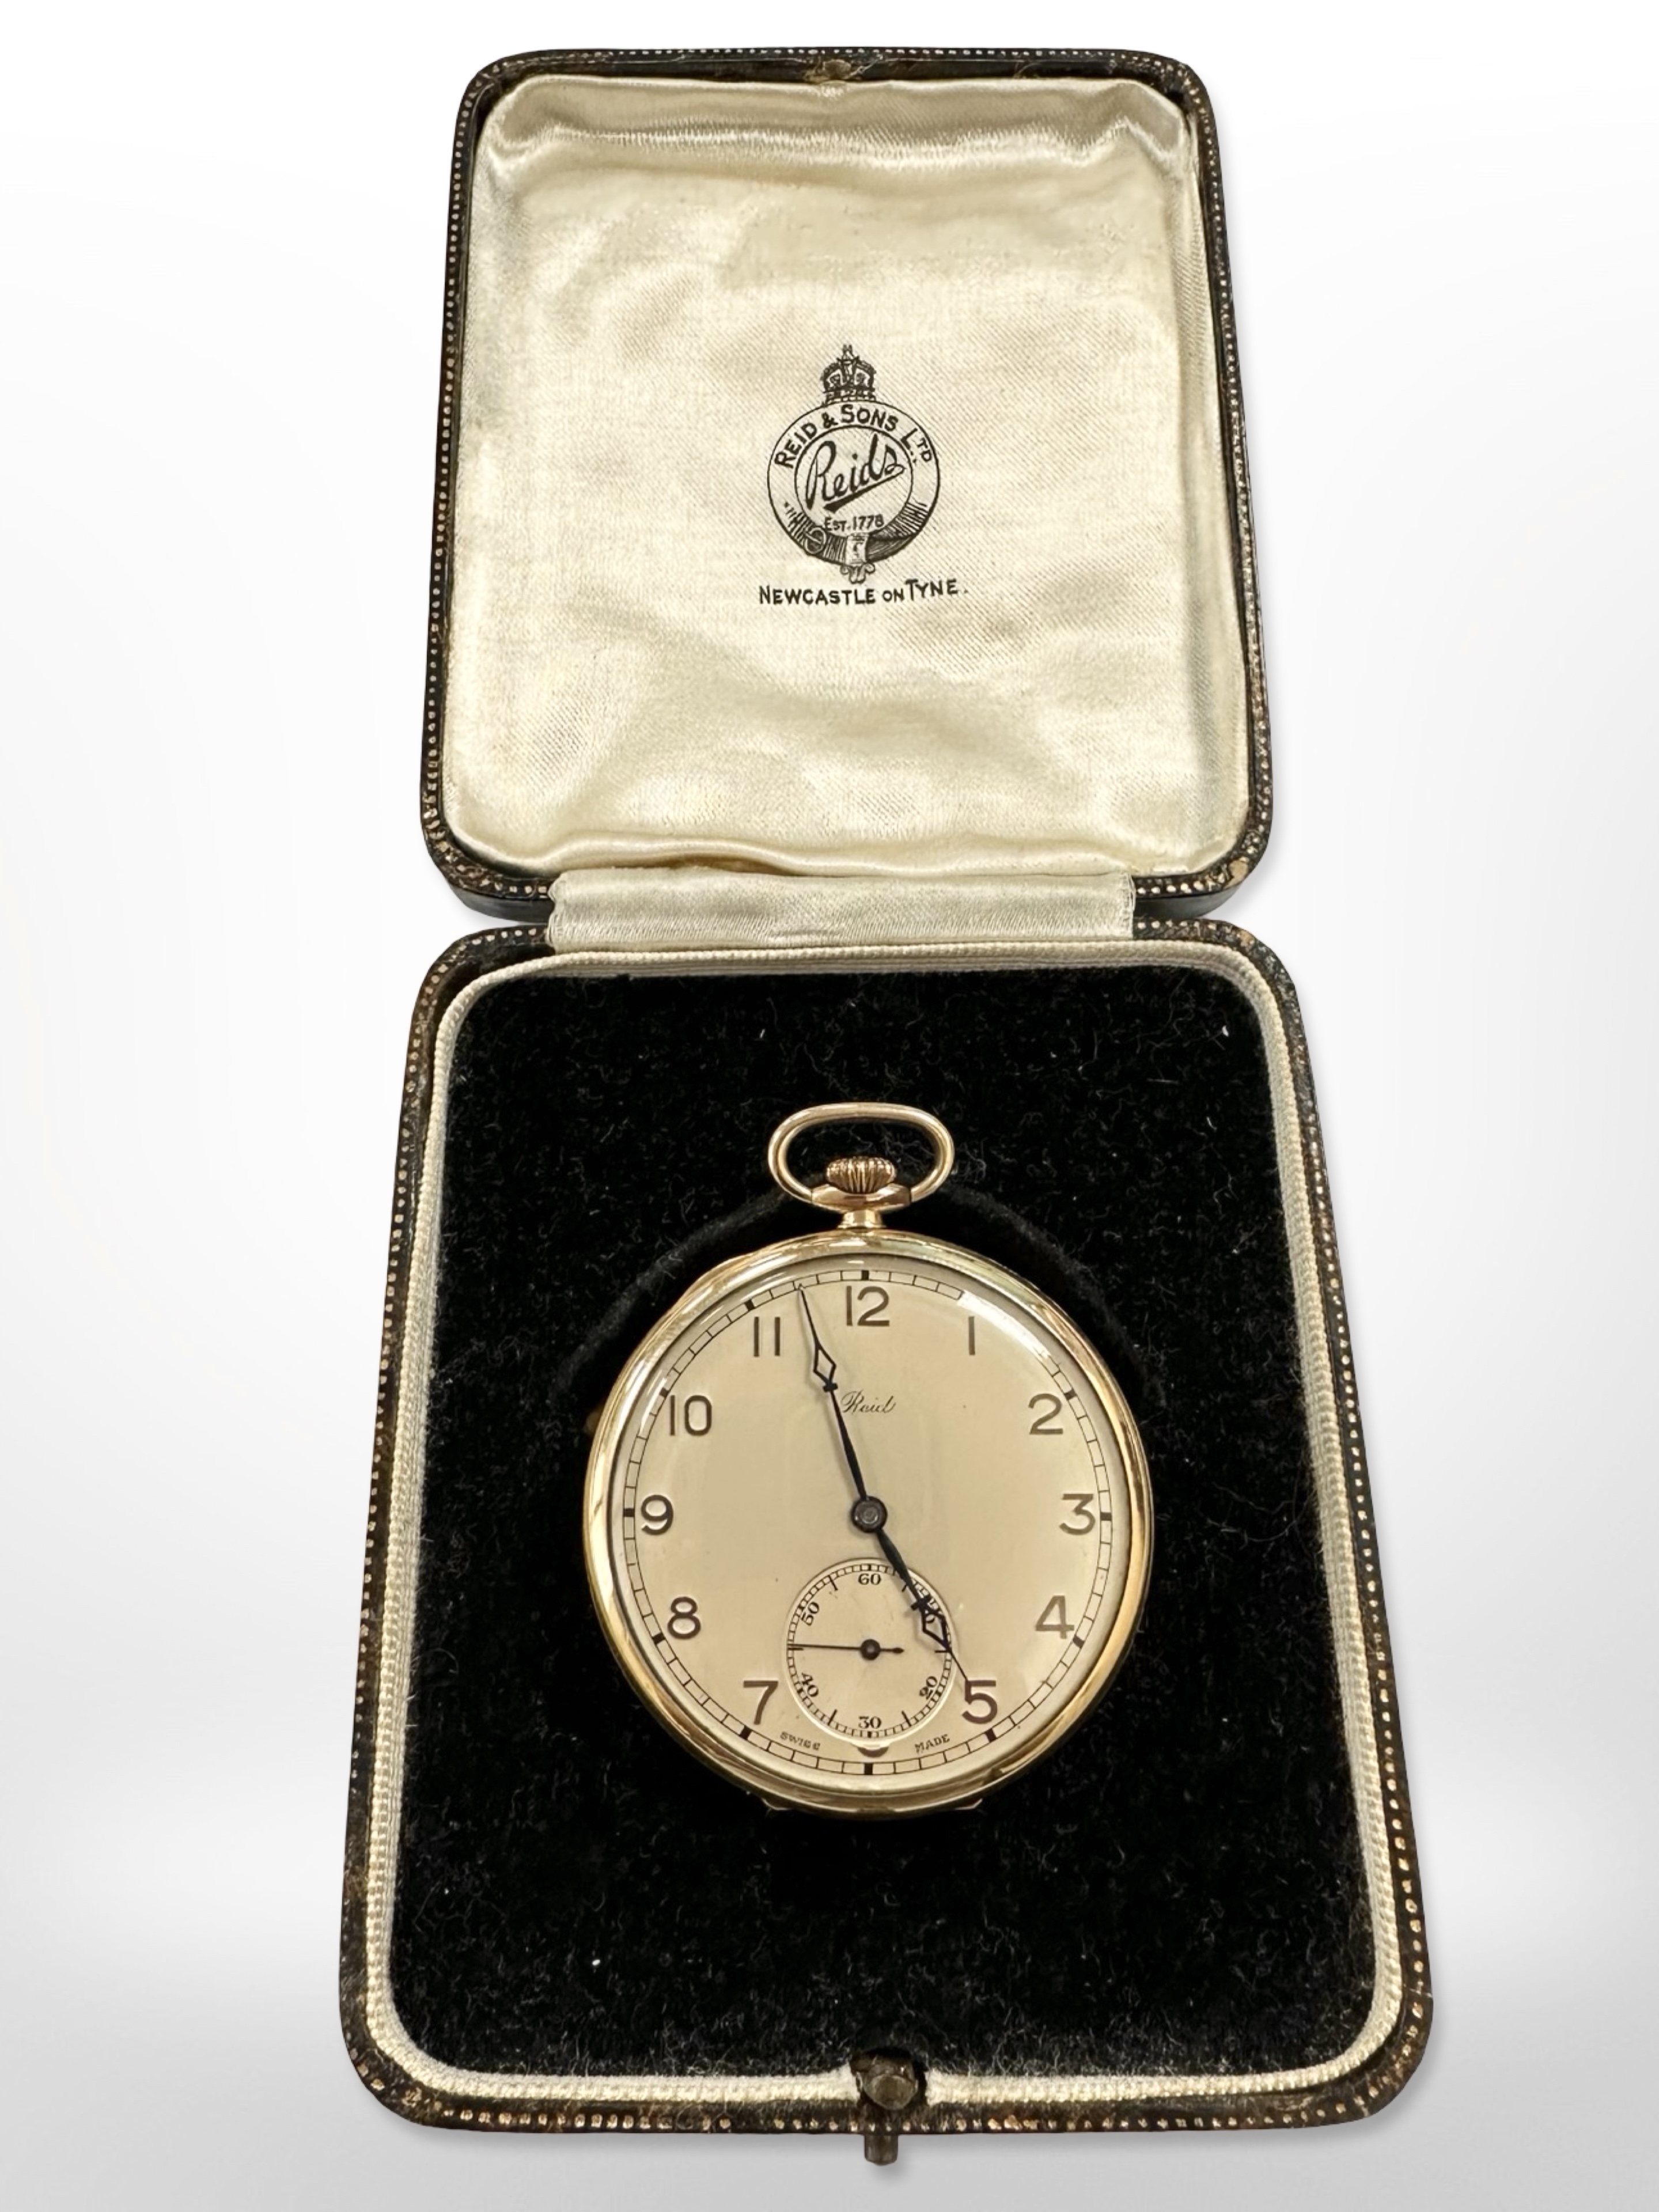 A Dennison Watch Company gold plated pocket watch, retailed by Reids of Newcastle upon Tyne,